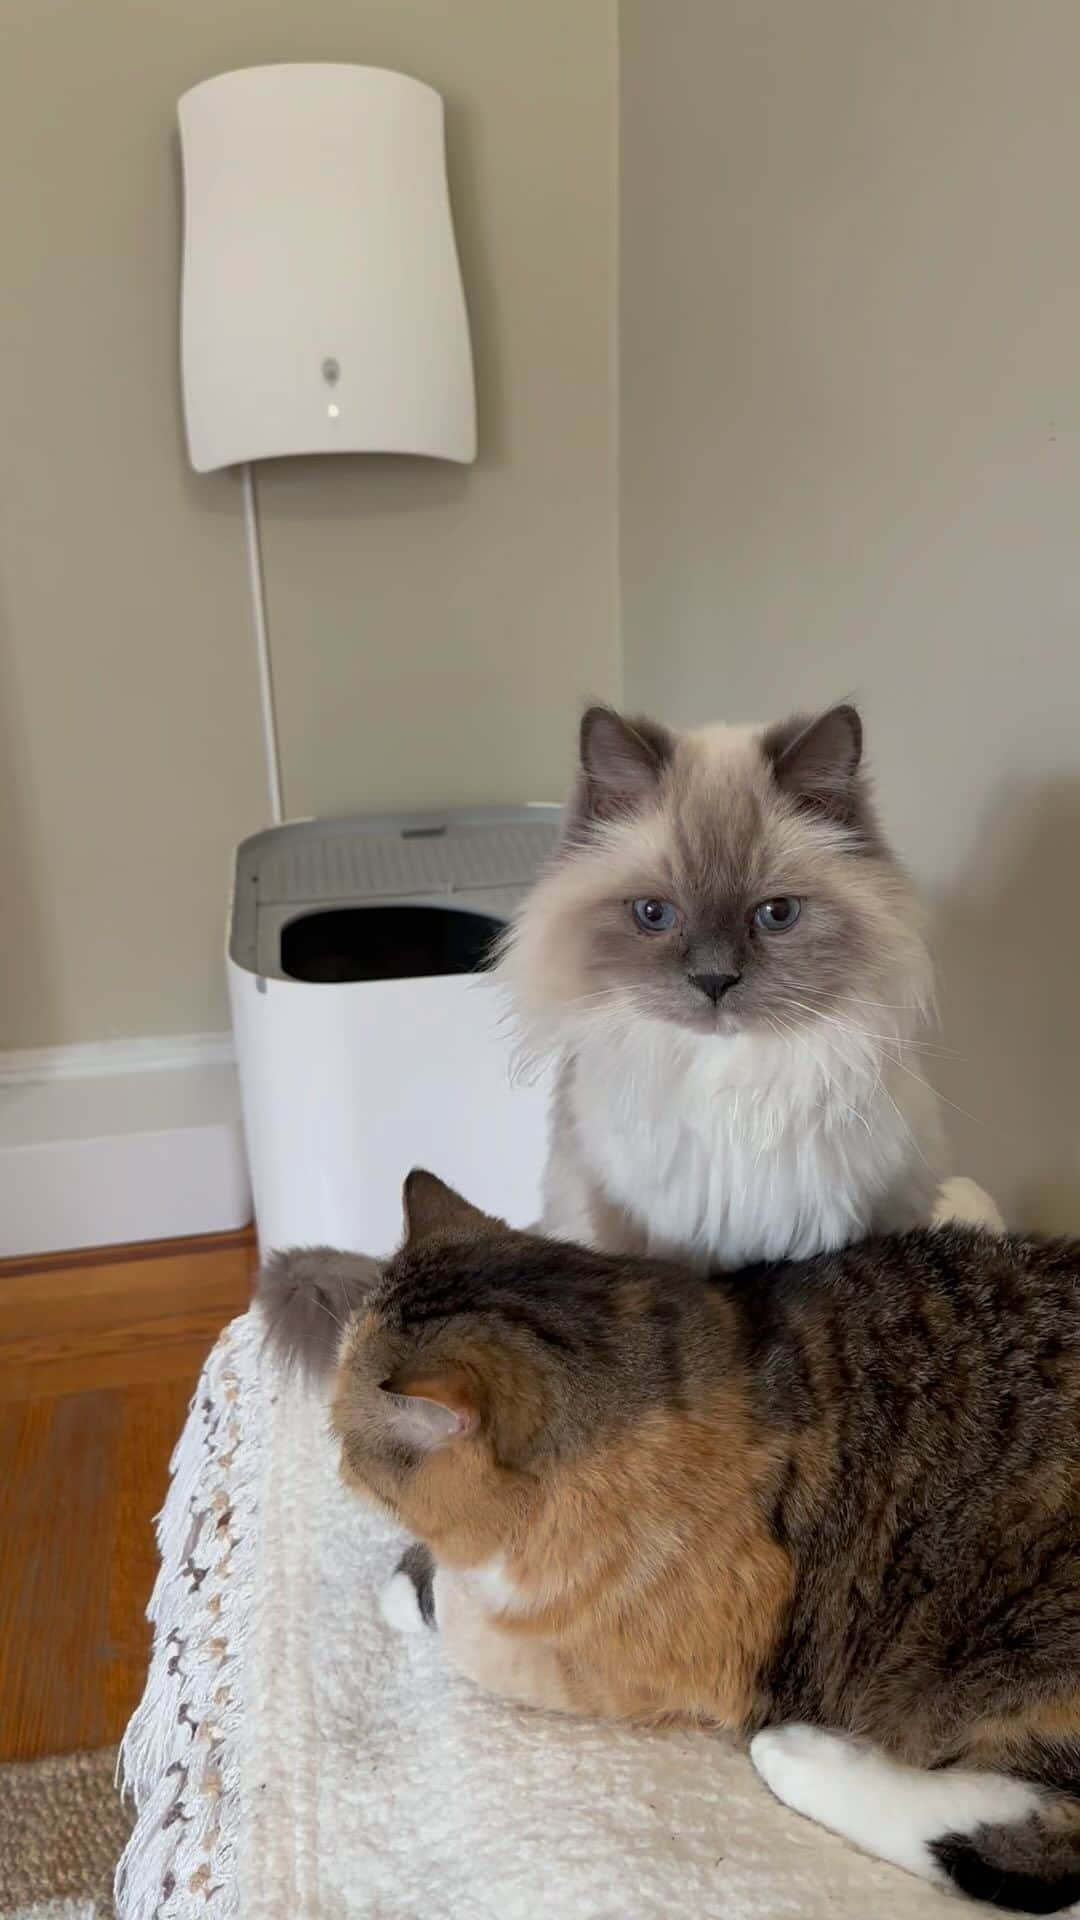 Tinaのインスタグラム：「#AD We were gifted the QAIS-air- 04 air purifier by SUNSTAR @sunstarqais.us and I instantly fell in love with it! The design is light, sleek and easy to install. It is designed to catch pet odors from above before they spread and it is quiet. It is must when you have more than one pet and especially in a small space! It gets an A+ from us! #QAISair #SUNSTAR #SUNSTARQAISair #cleanair #petodor #furryandfresh」